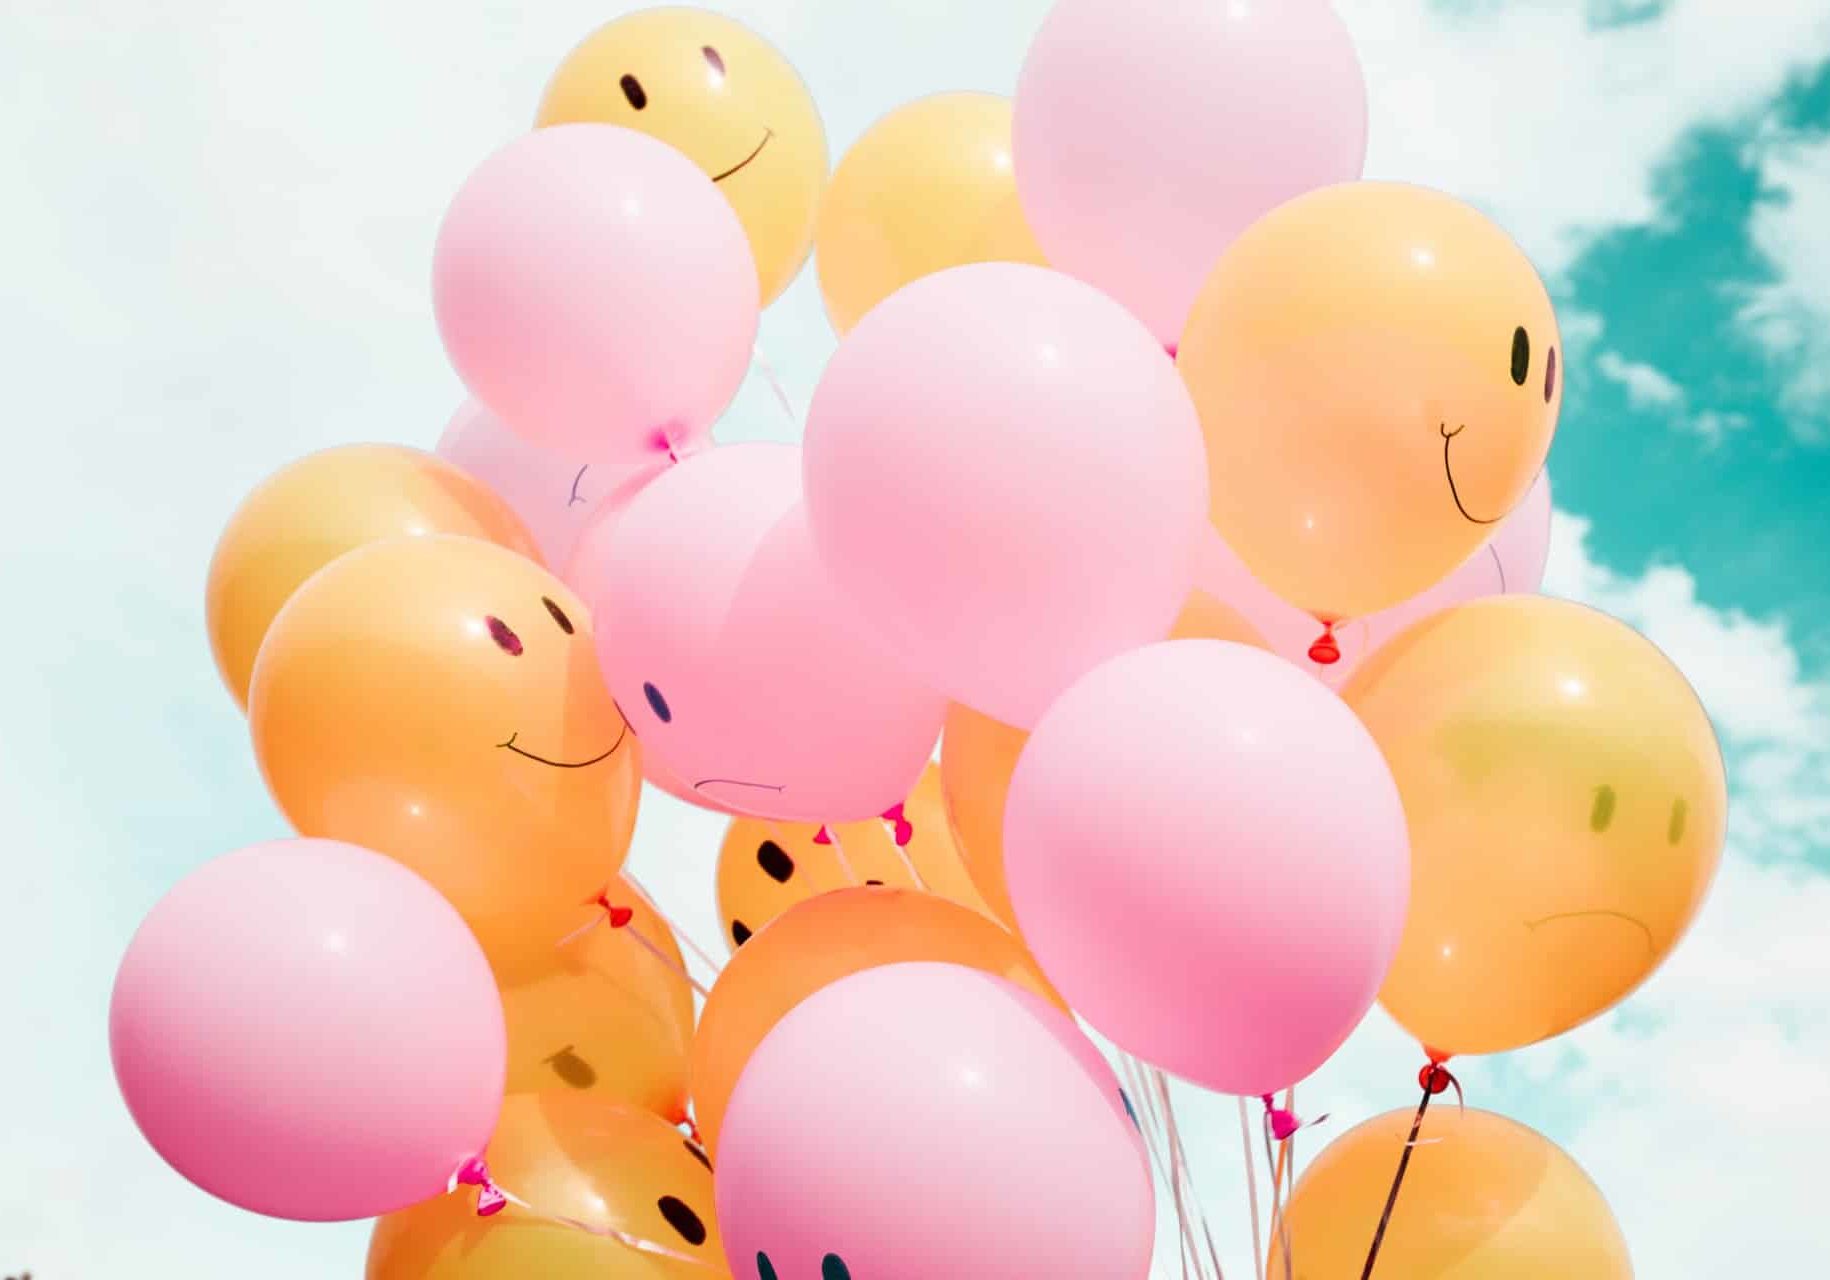 Orange and Pink Balloons With Happy Faces | Counseling Services